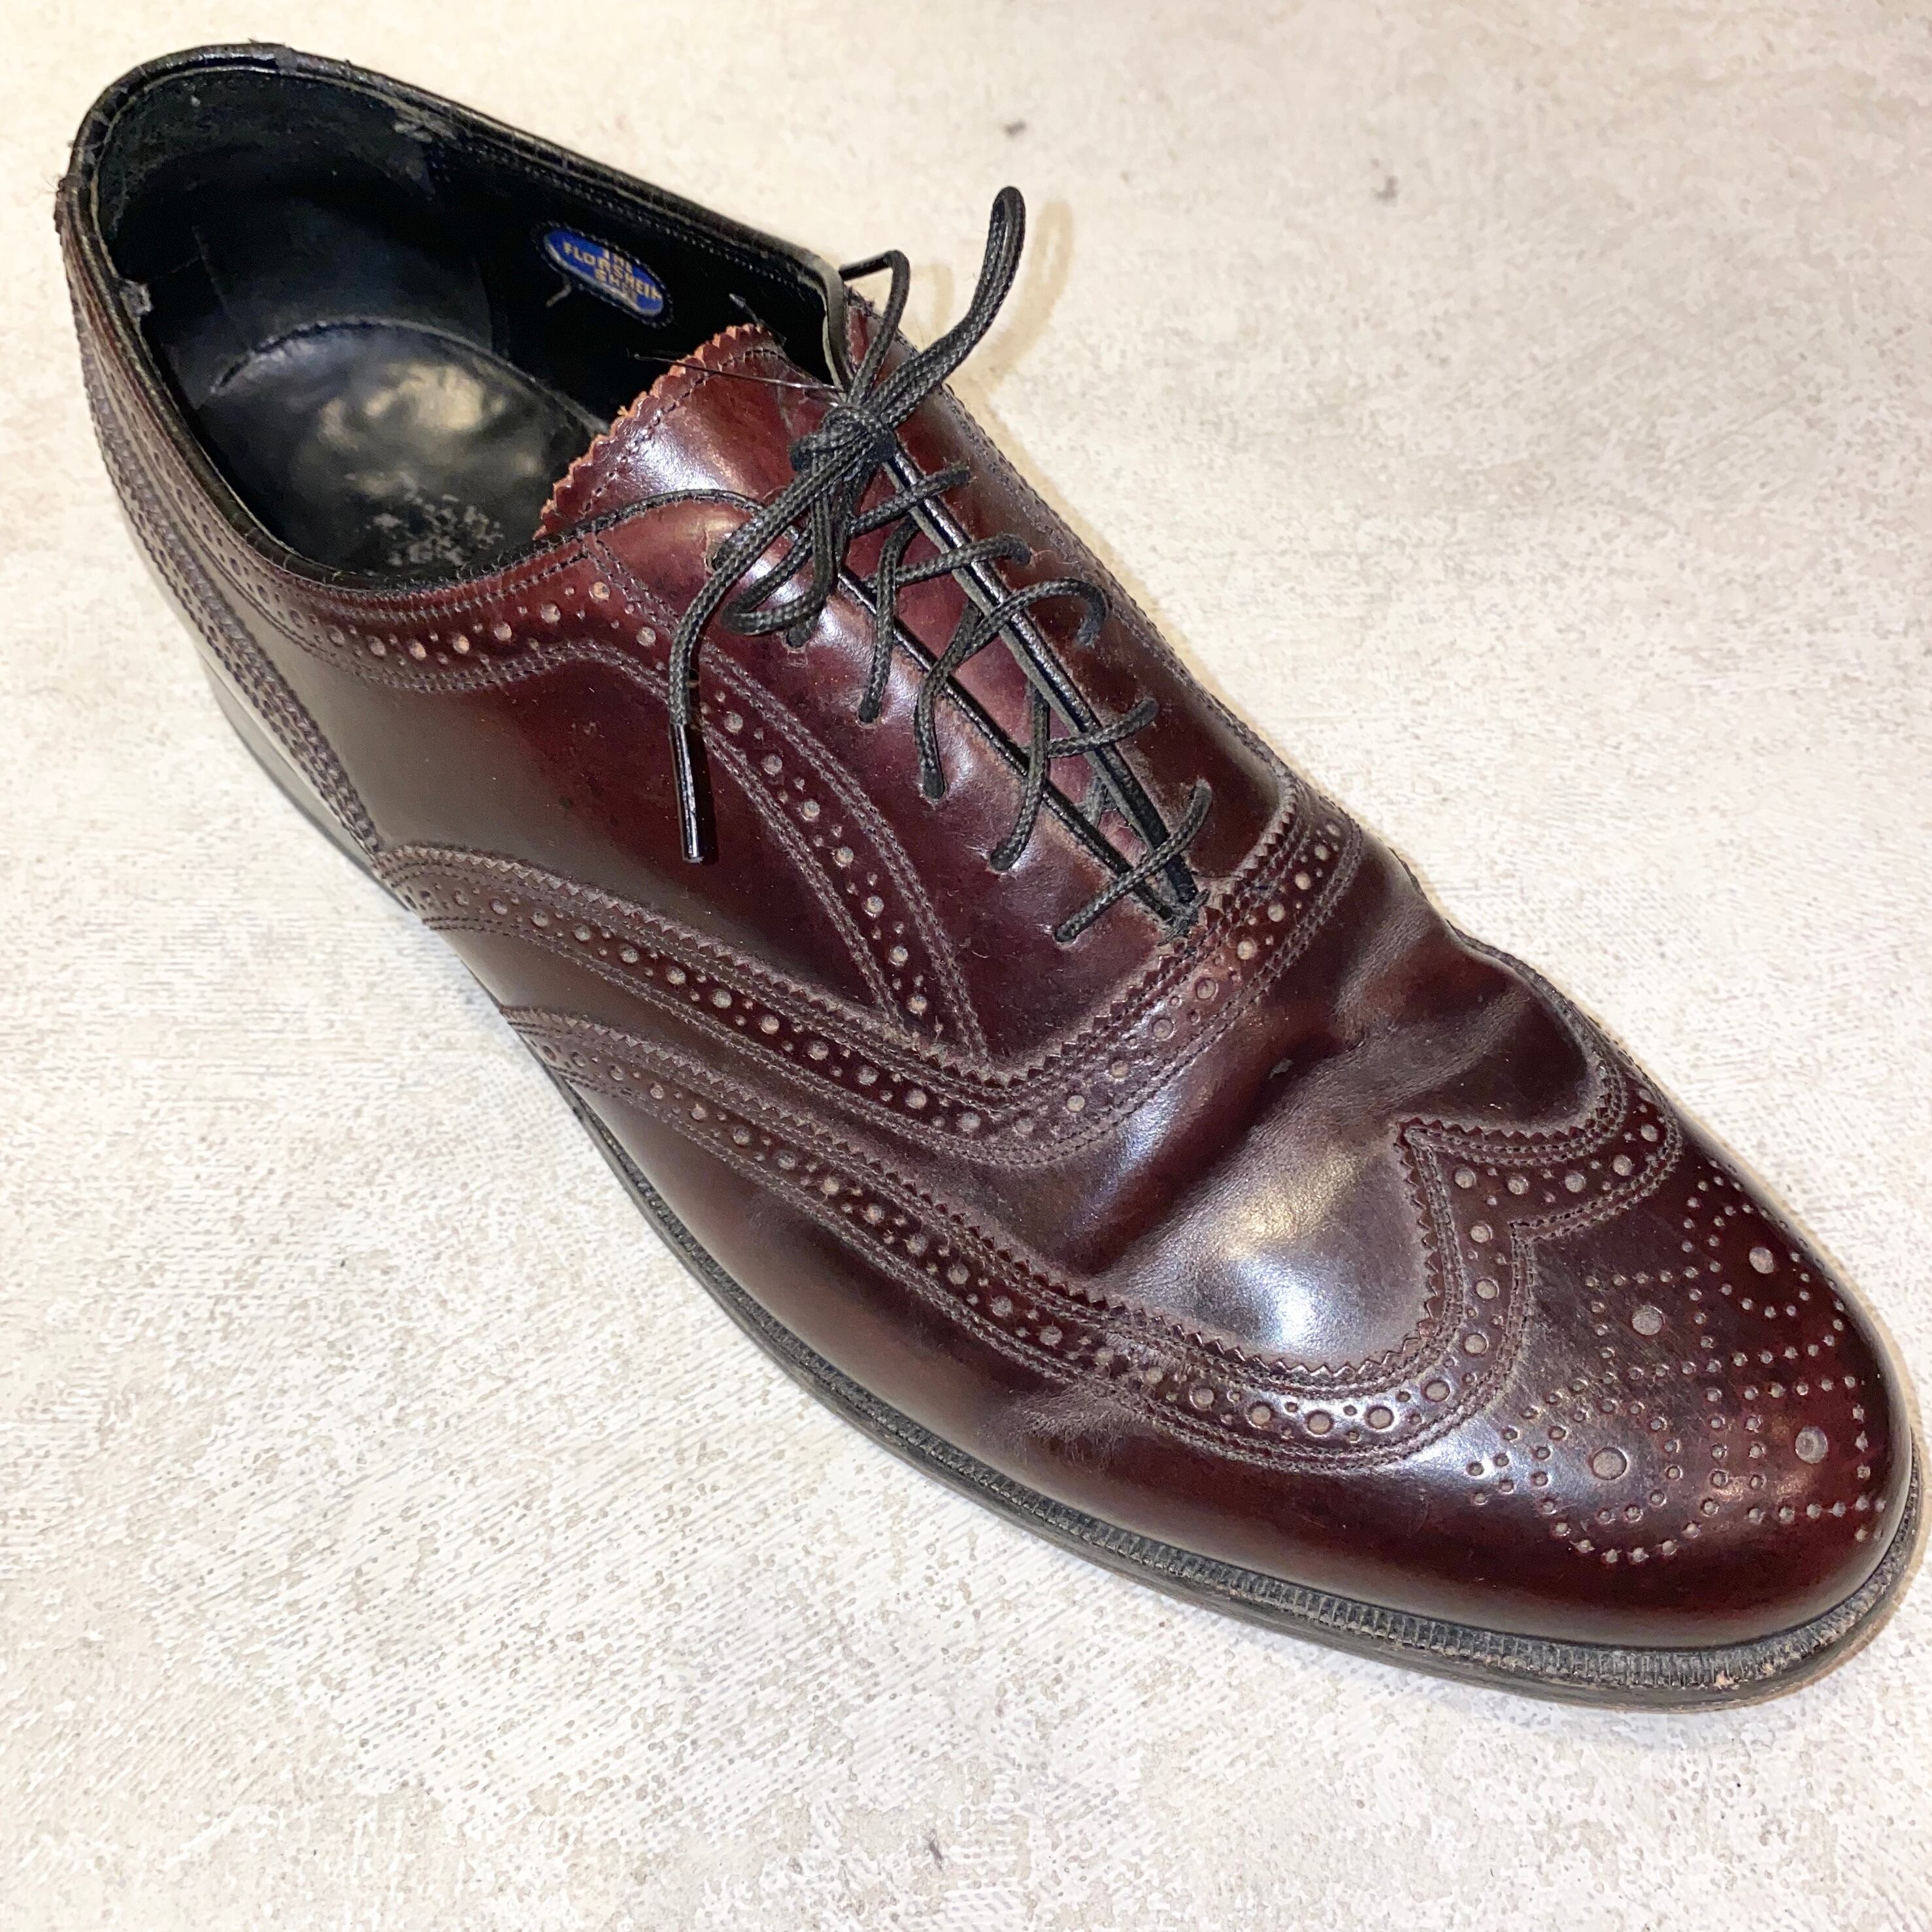 FLORSHEIM burgundy color full-brogue leather shoes | NOIR ONLINE powered by  BASE